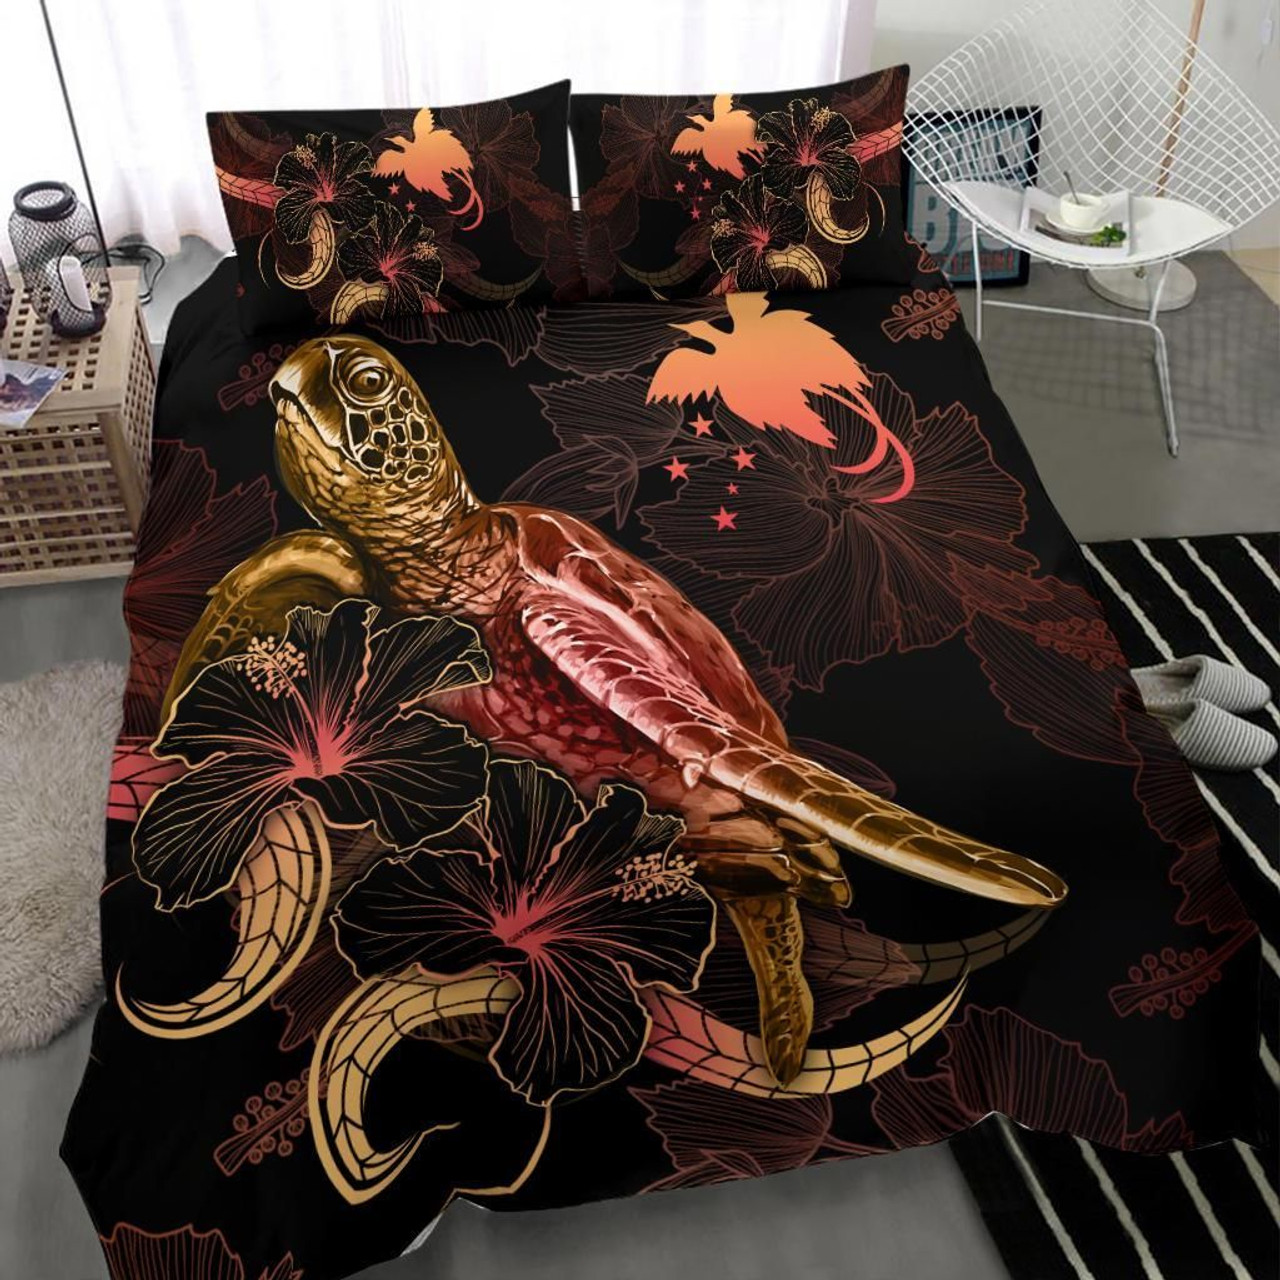 Papua New Guinea Polynesian Bedding Set - Turtle With Blooming Hibiscus Gold 3